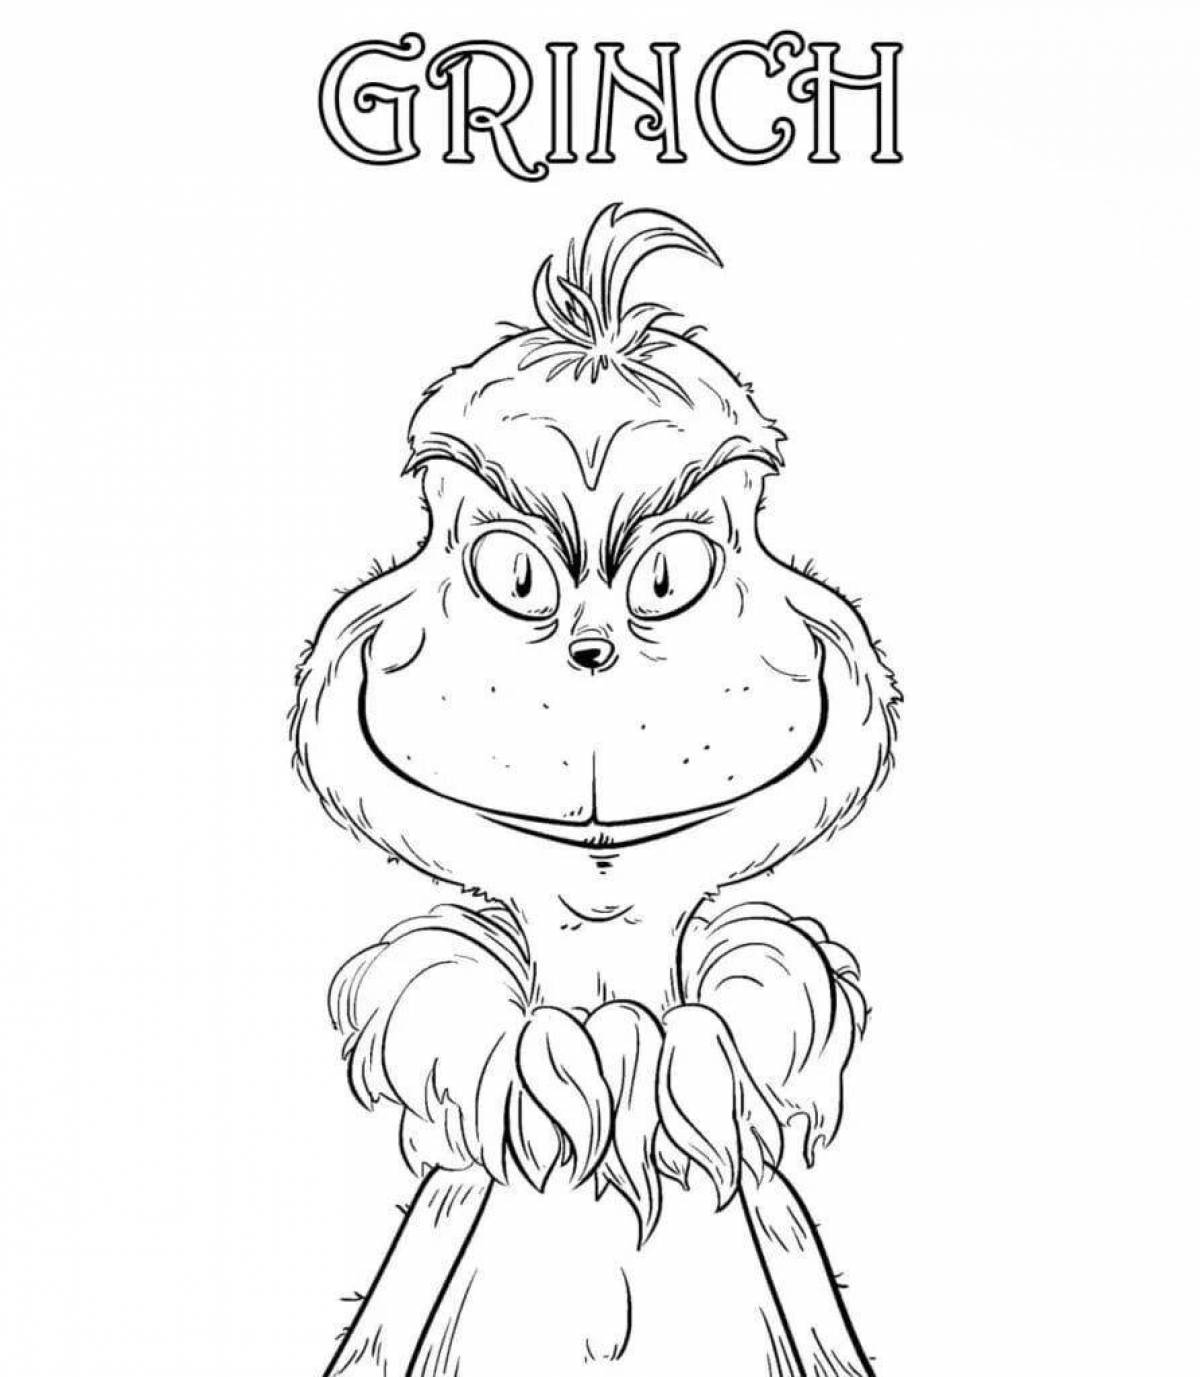 Naughty grinch coloring book for kids